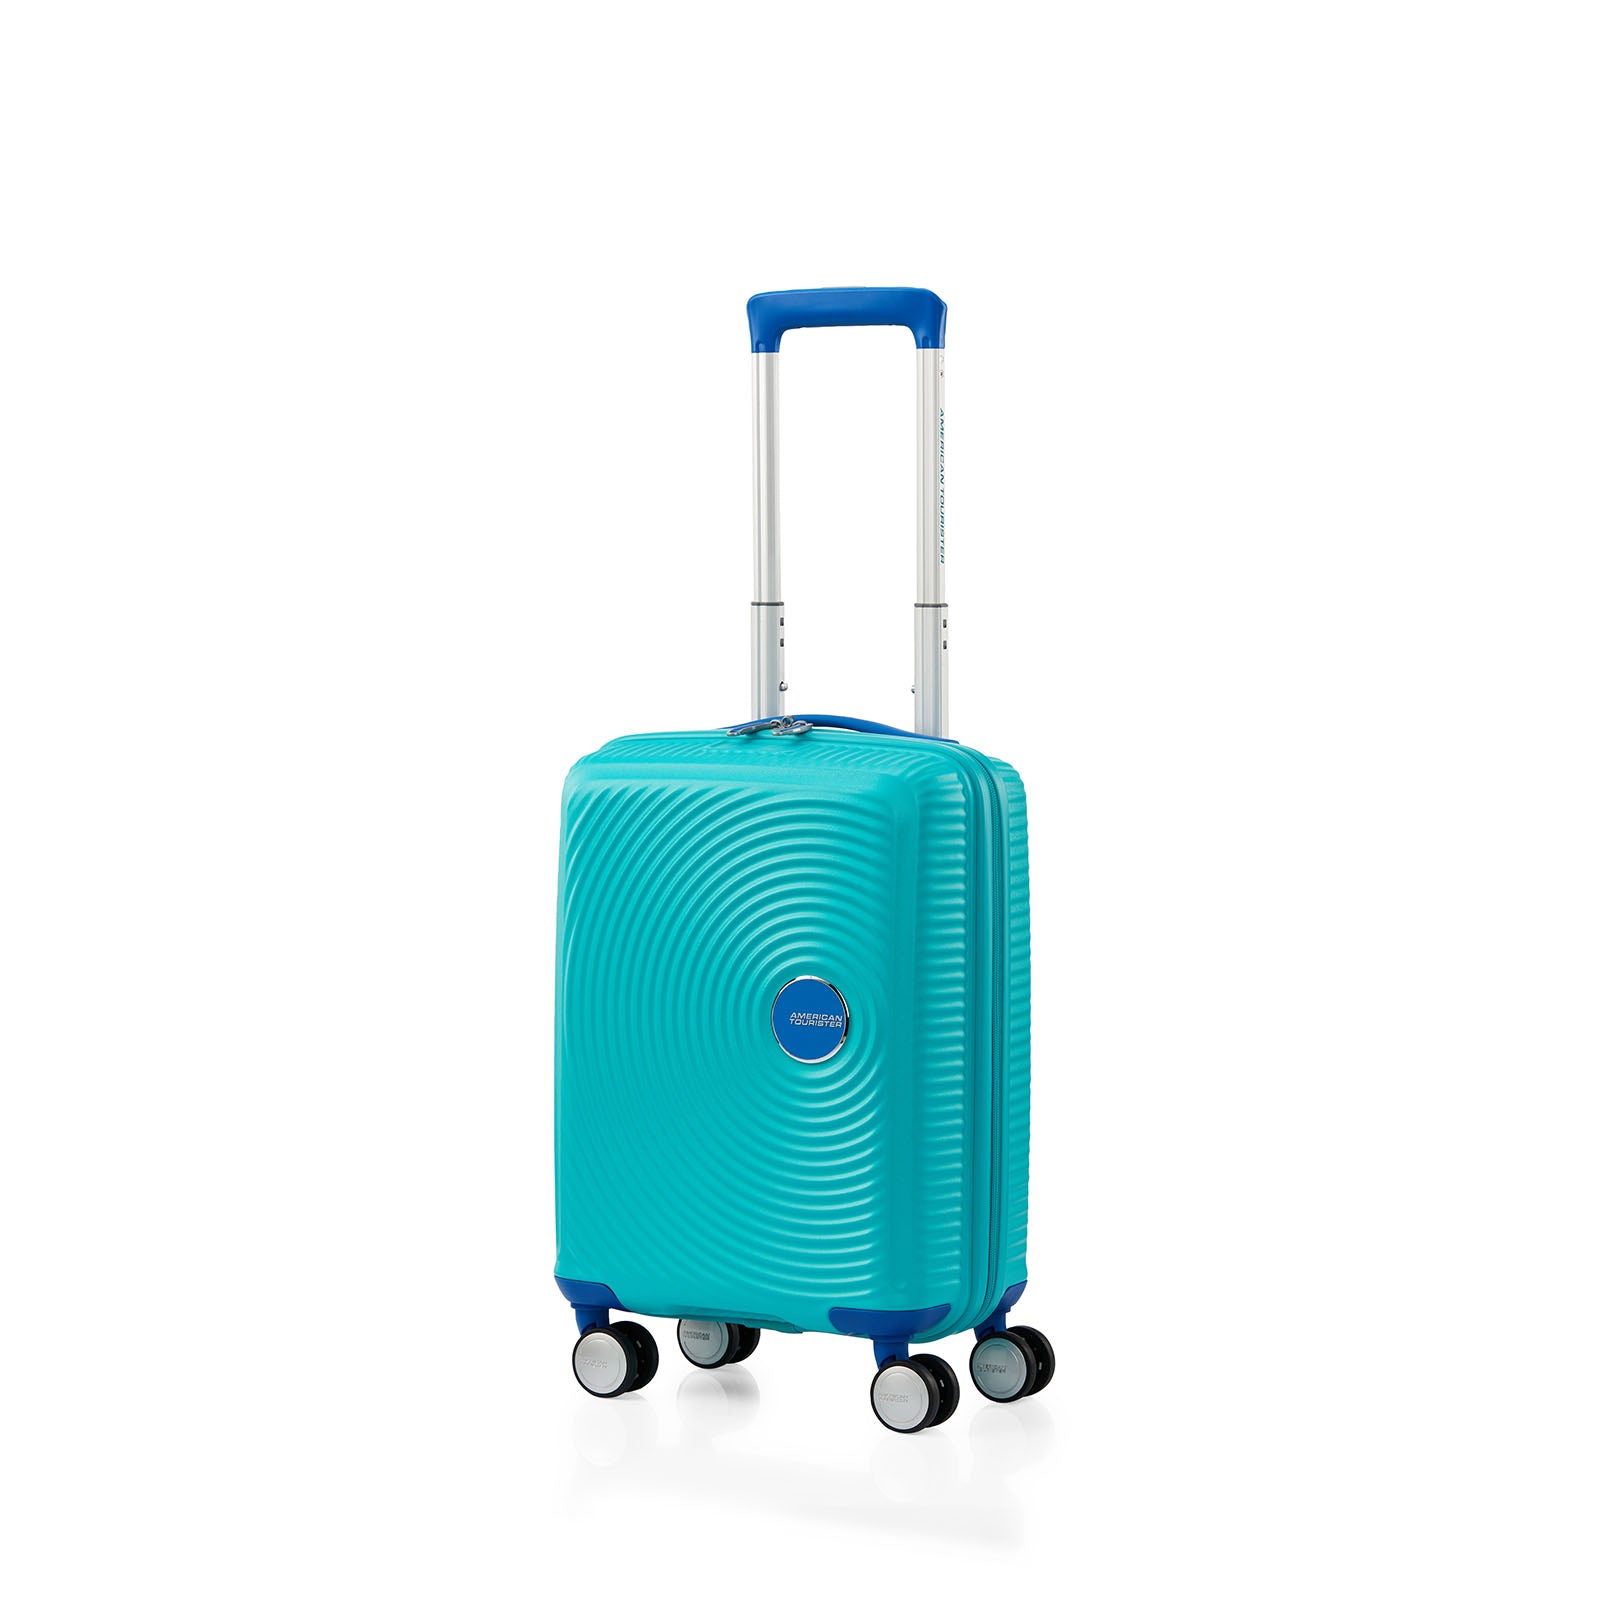 American-Tourister-Little-Curio-47cm-Carry-On-Suitcase-Teal-Blue-Front-Angle